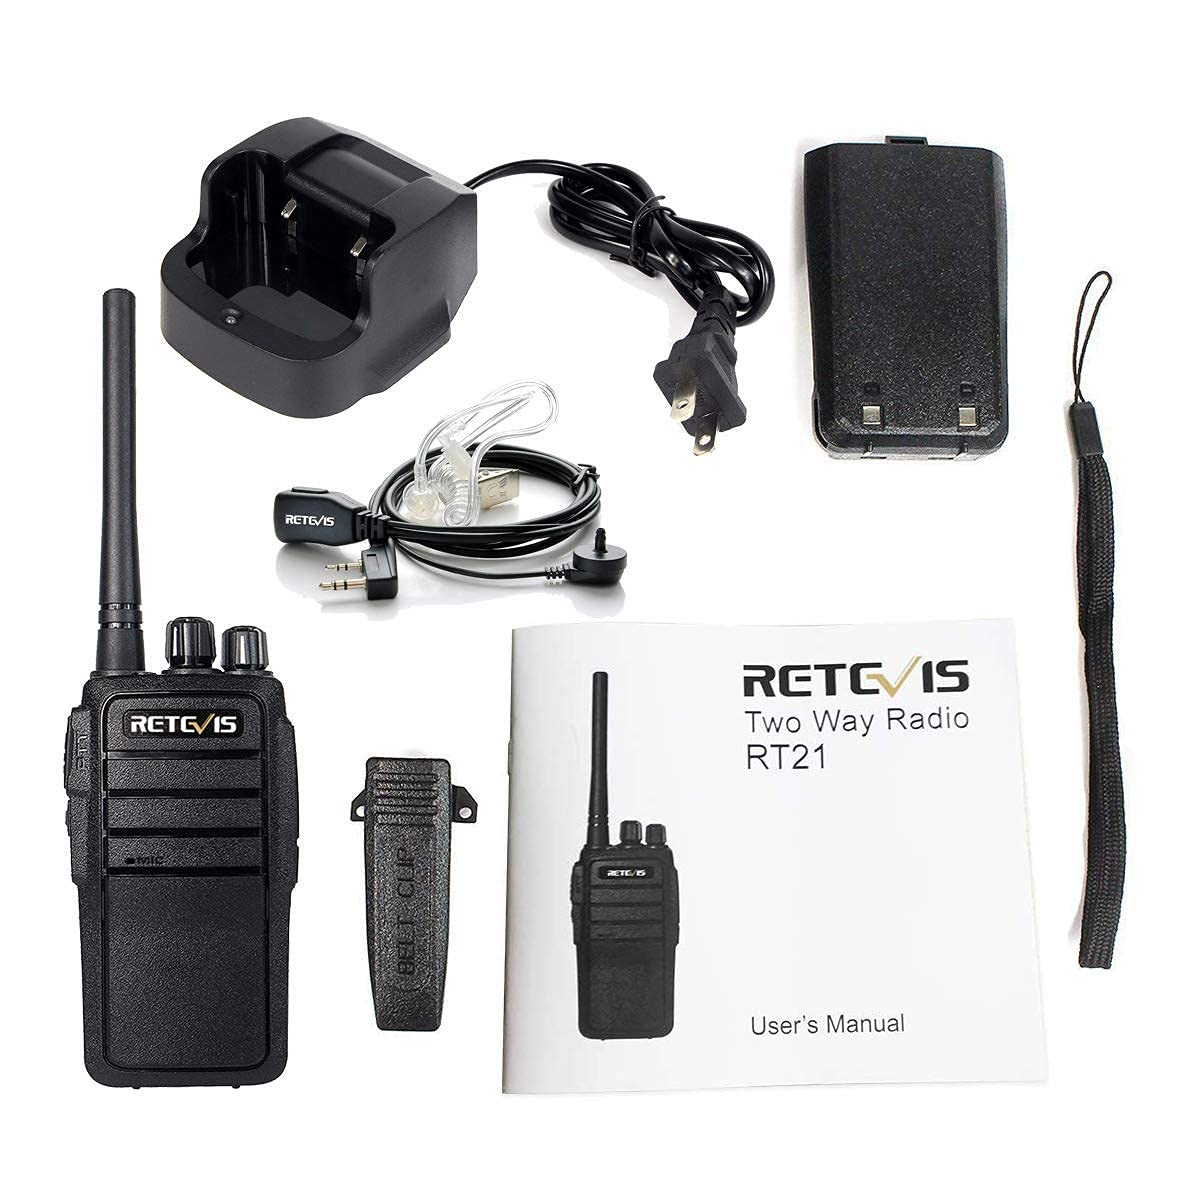 Case of 5,Retevis RT21 Walkie Talkies for Adults Long Range, Handfree Rugged Two Way Radio with Earpiece for Commercial Construction Warehouse Security 2 Way Radios